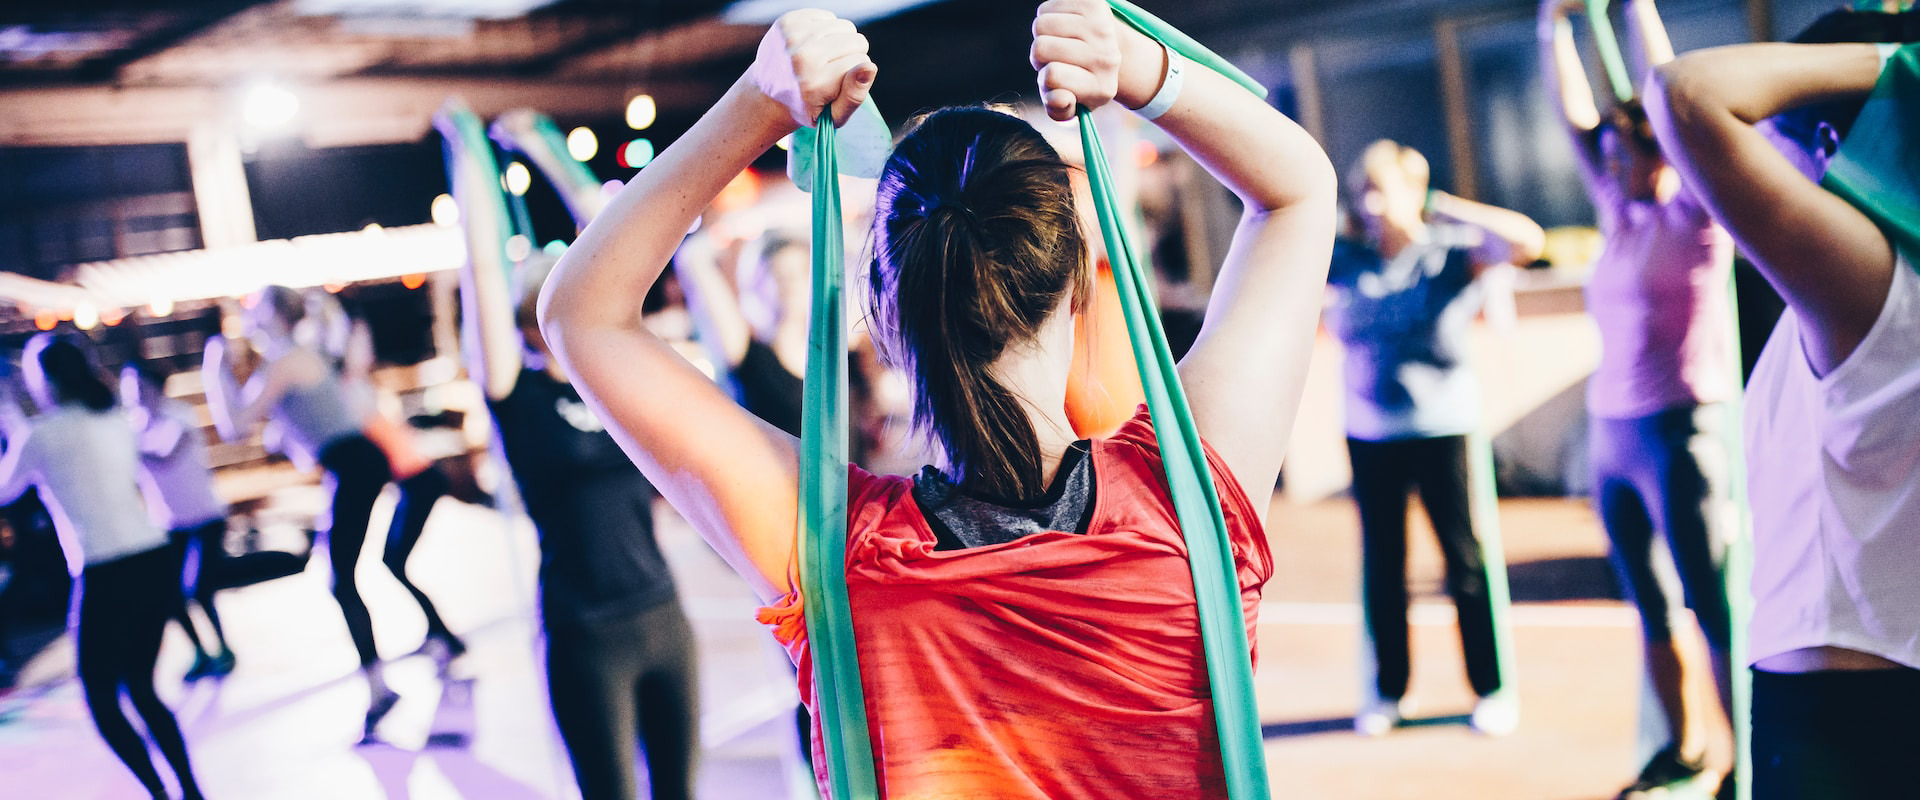 Get inspired with these fitness event ideas for gym owners: group classes, workshops, and more!